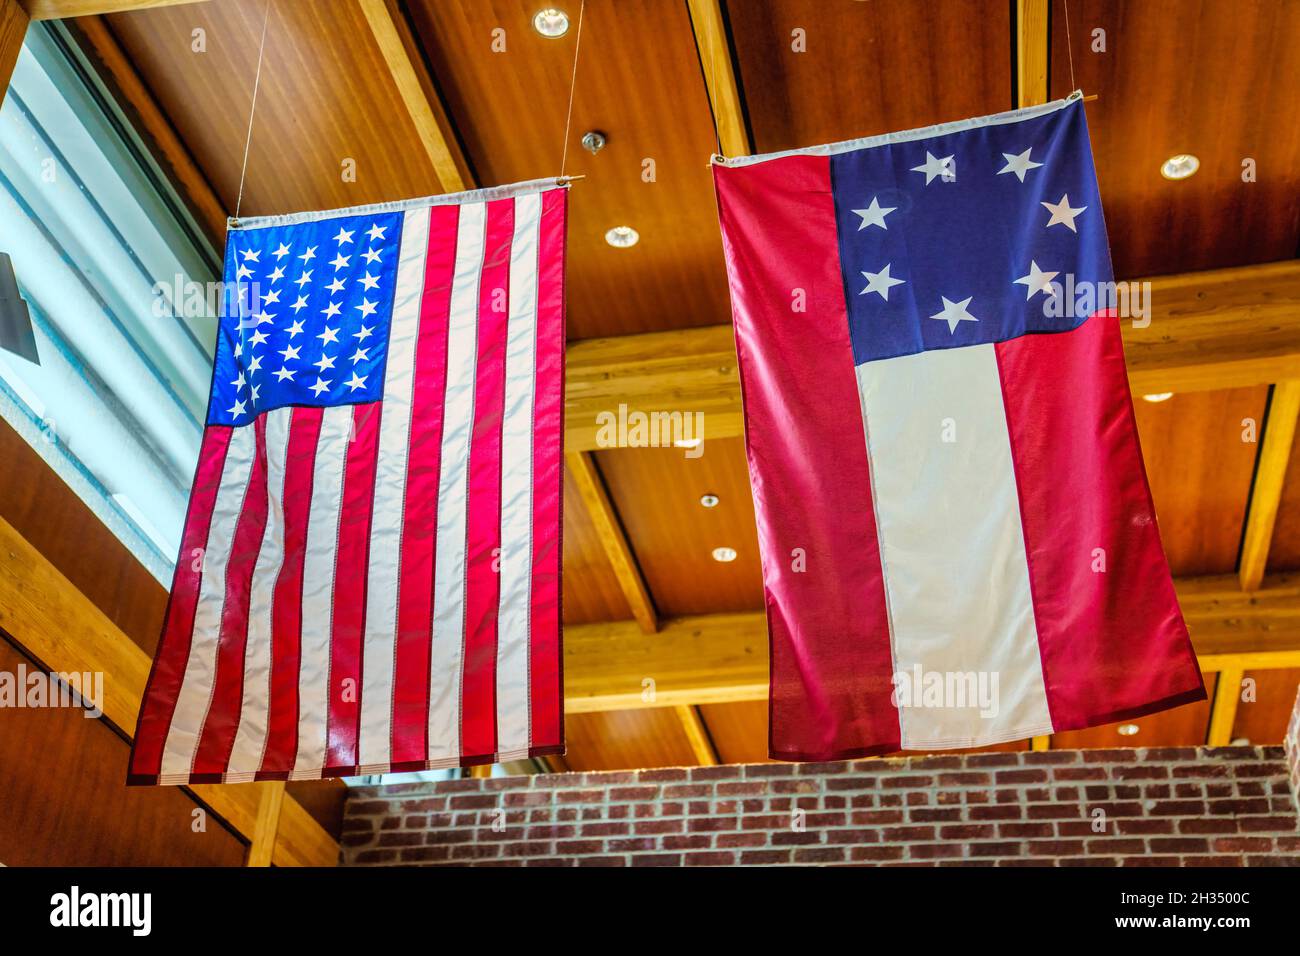 The American and Confederate flags hanging inside the Corinth Civil War Interpretive Center of Shiloh National Military Park in Mississippi. Stock Photo